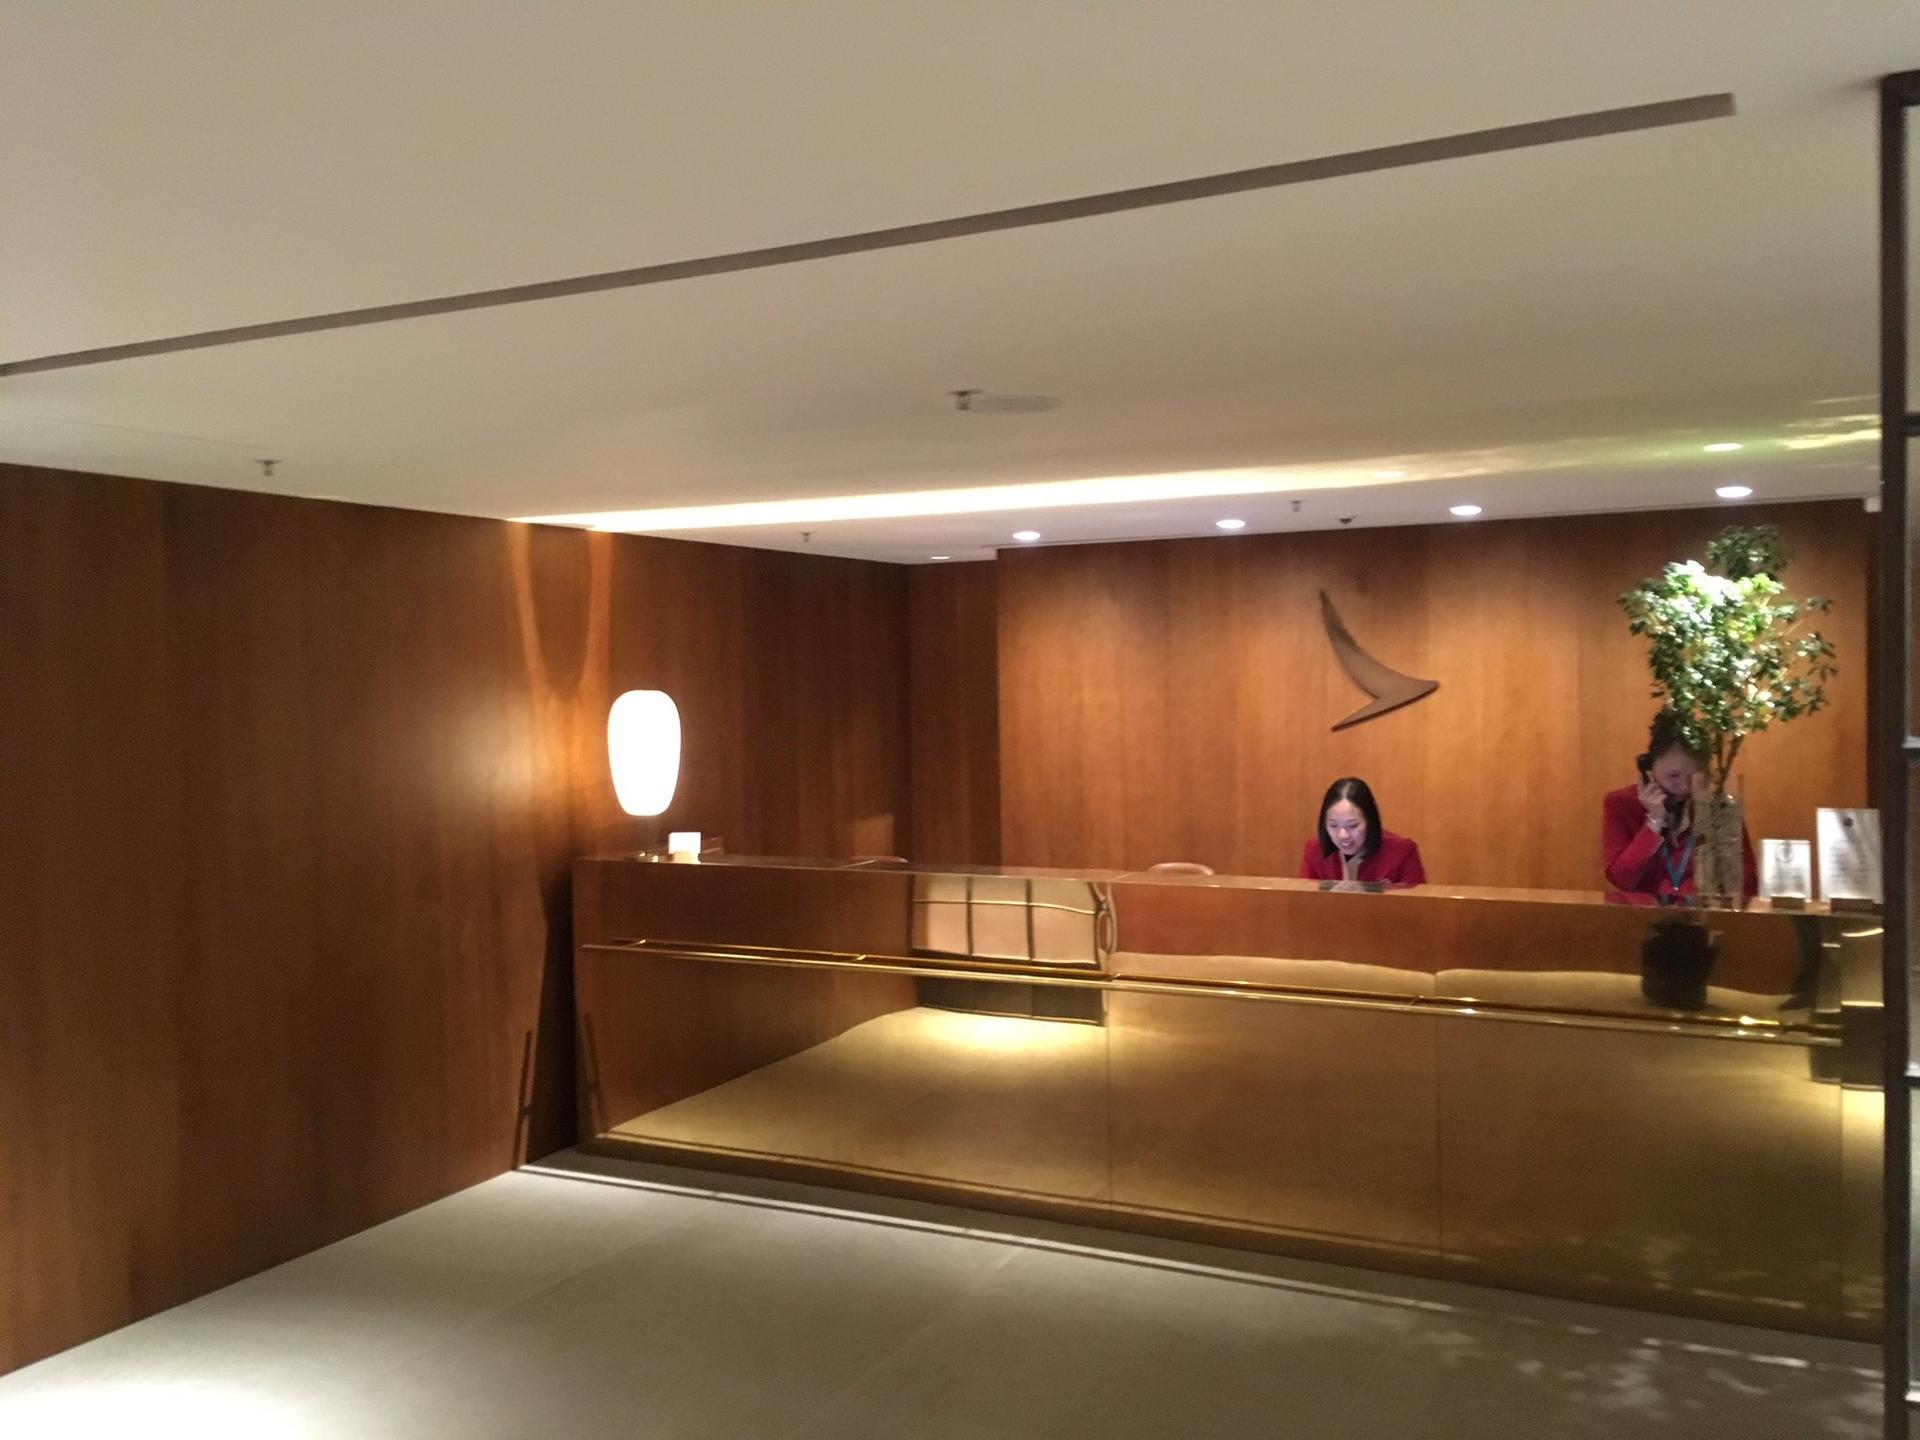 Cathay Pacific The Pier First Class Lounge image 73 of 100